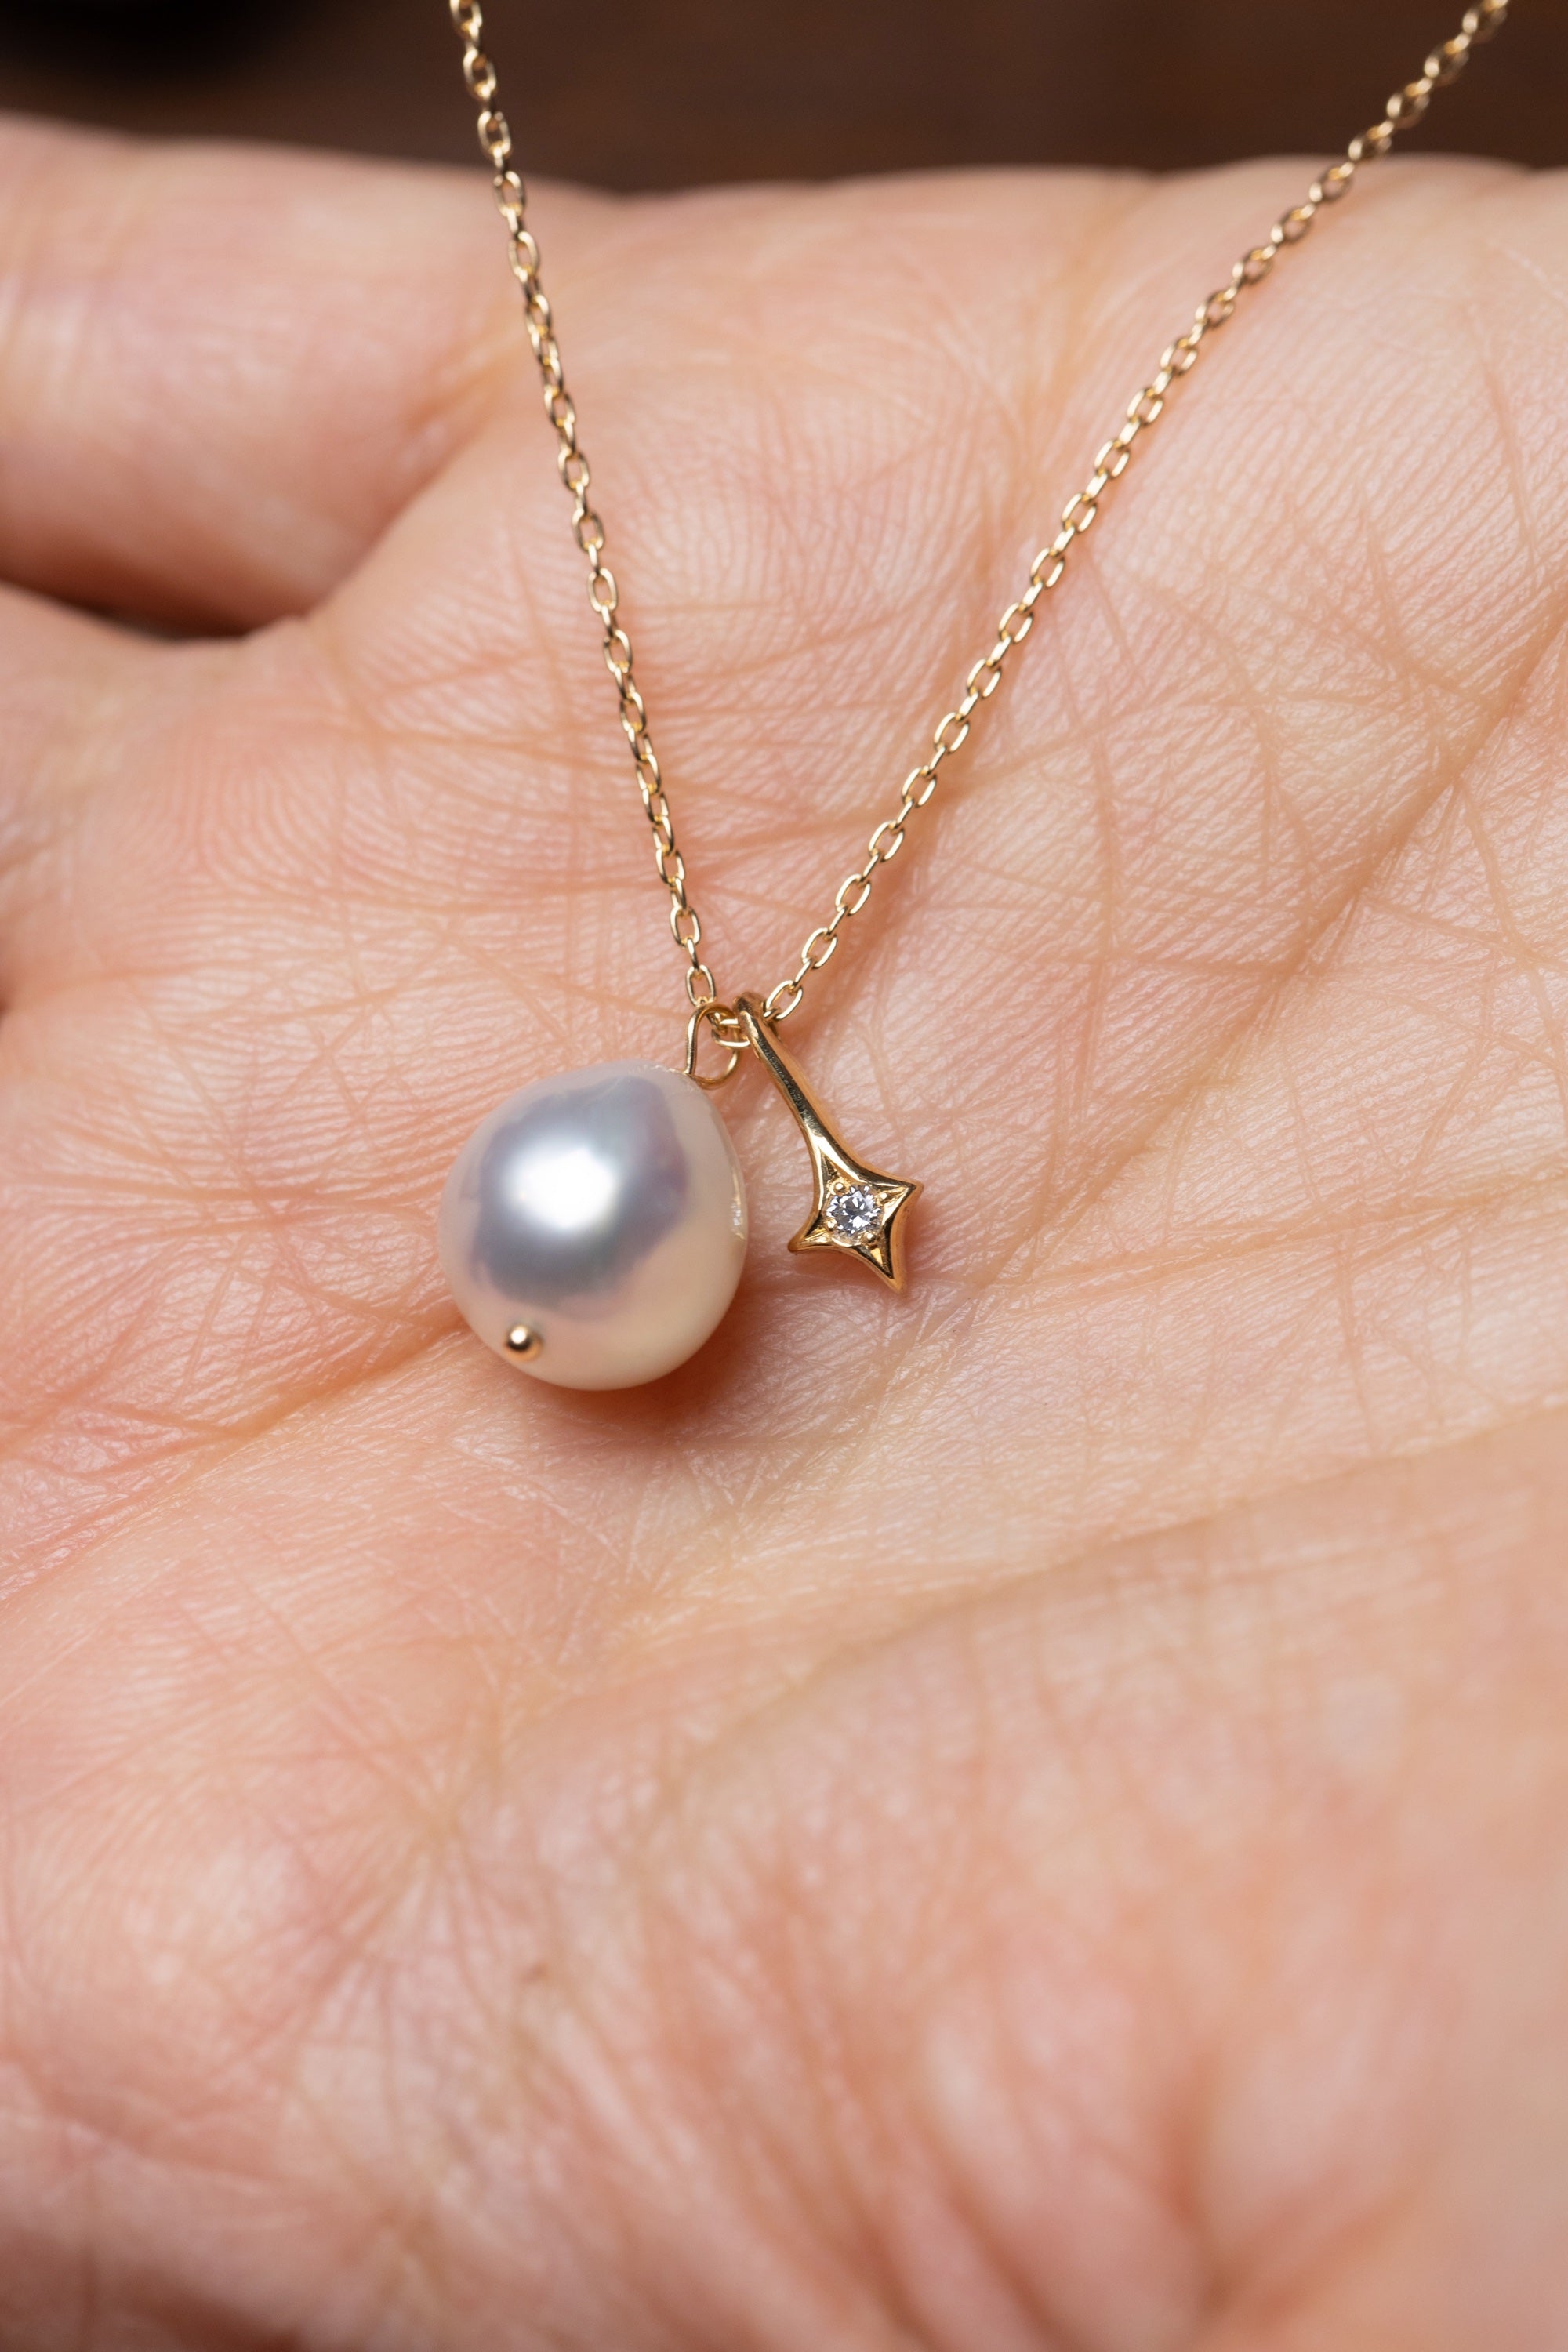 Single Akoya Pearl With A Star Dust Necklace (18k)